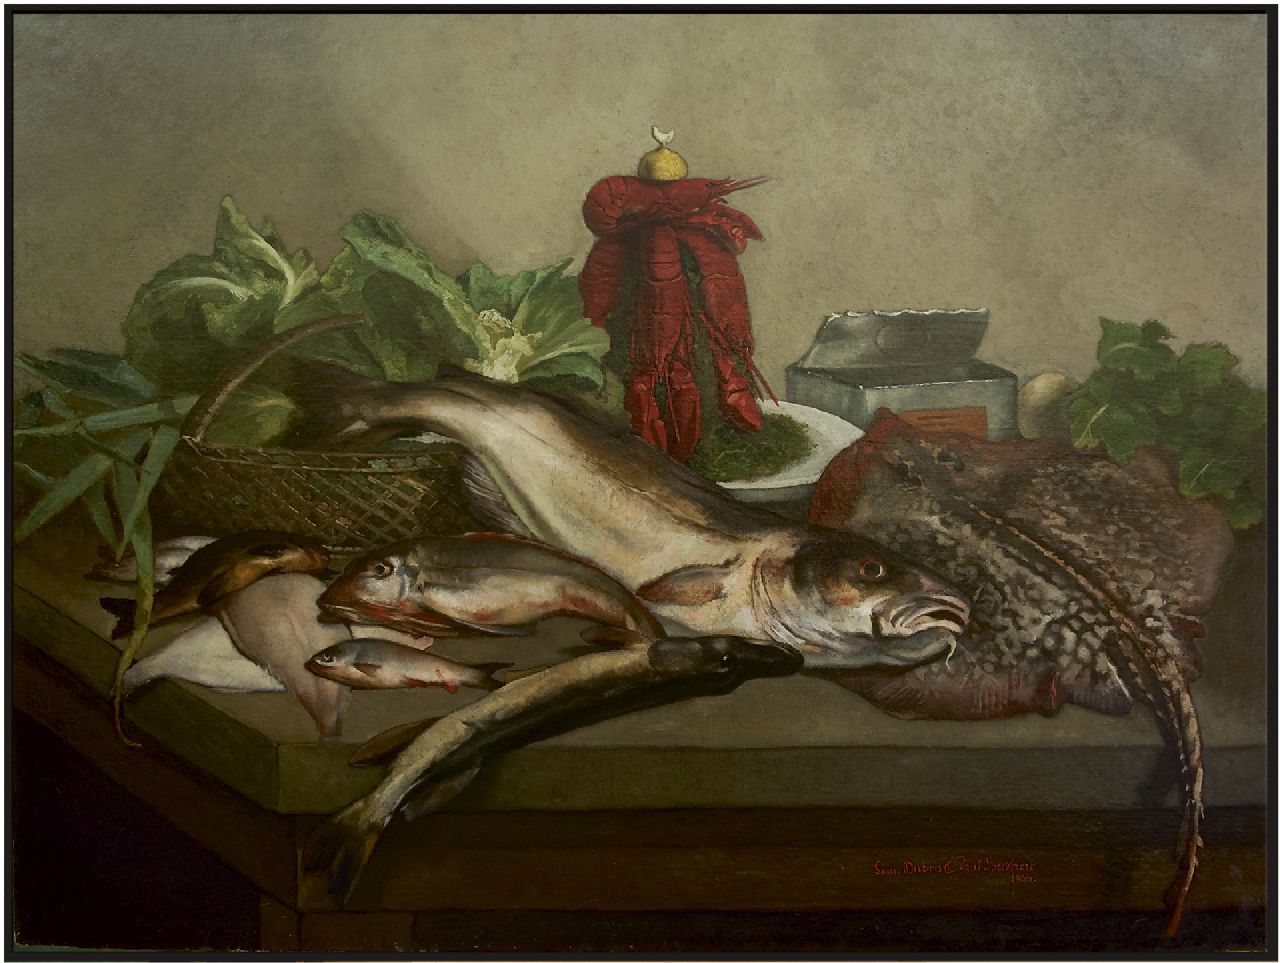 Dubois/Speekaert L./L.  | Louis/Léopold Dubois/Speekaert | Paintings offered for sale | A still life with fish and lobster, oil on canvas 105.9 x 142.2 cm, signed l.r. by both artists and dated 1866